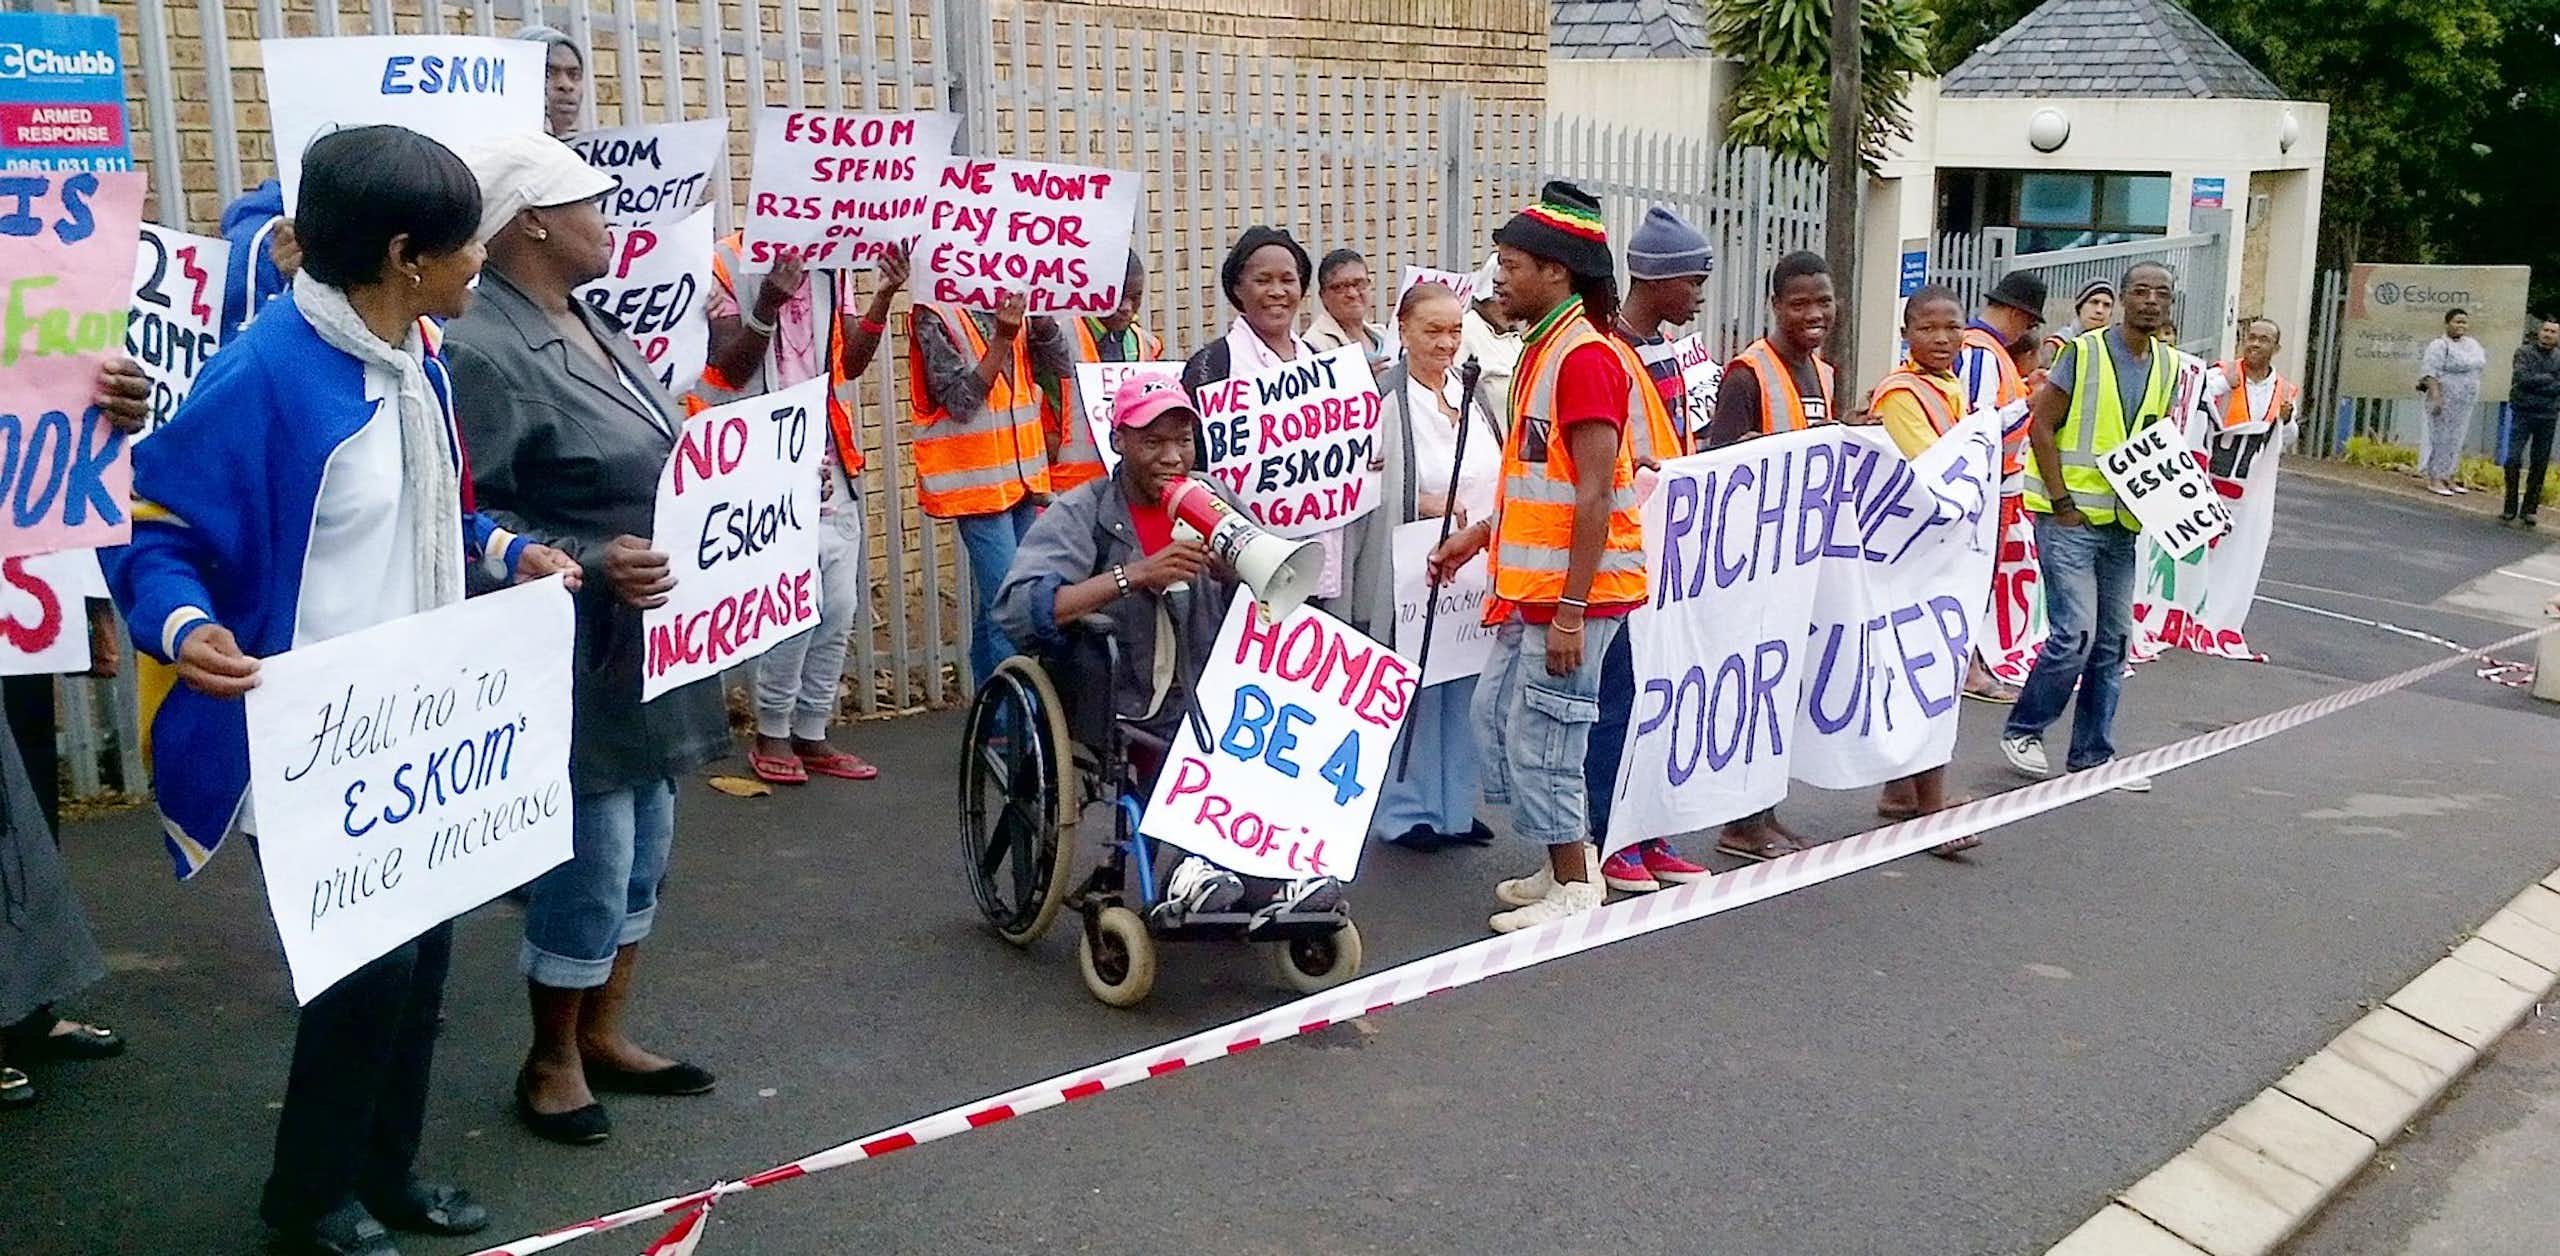 A group of people standing in a street (one in a wheelchair with a megaphone) behind barrier tape and holding placards.